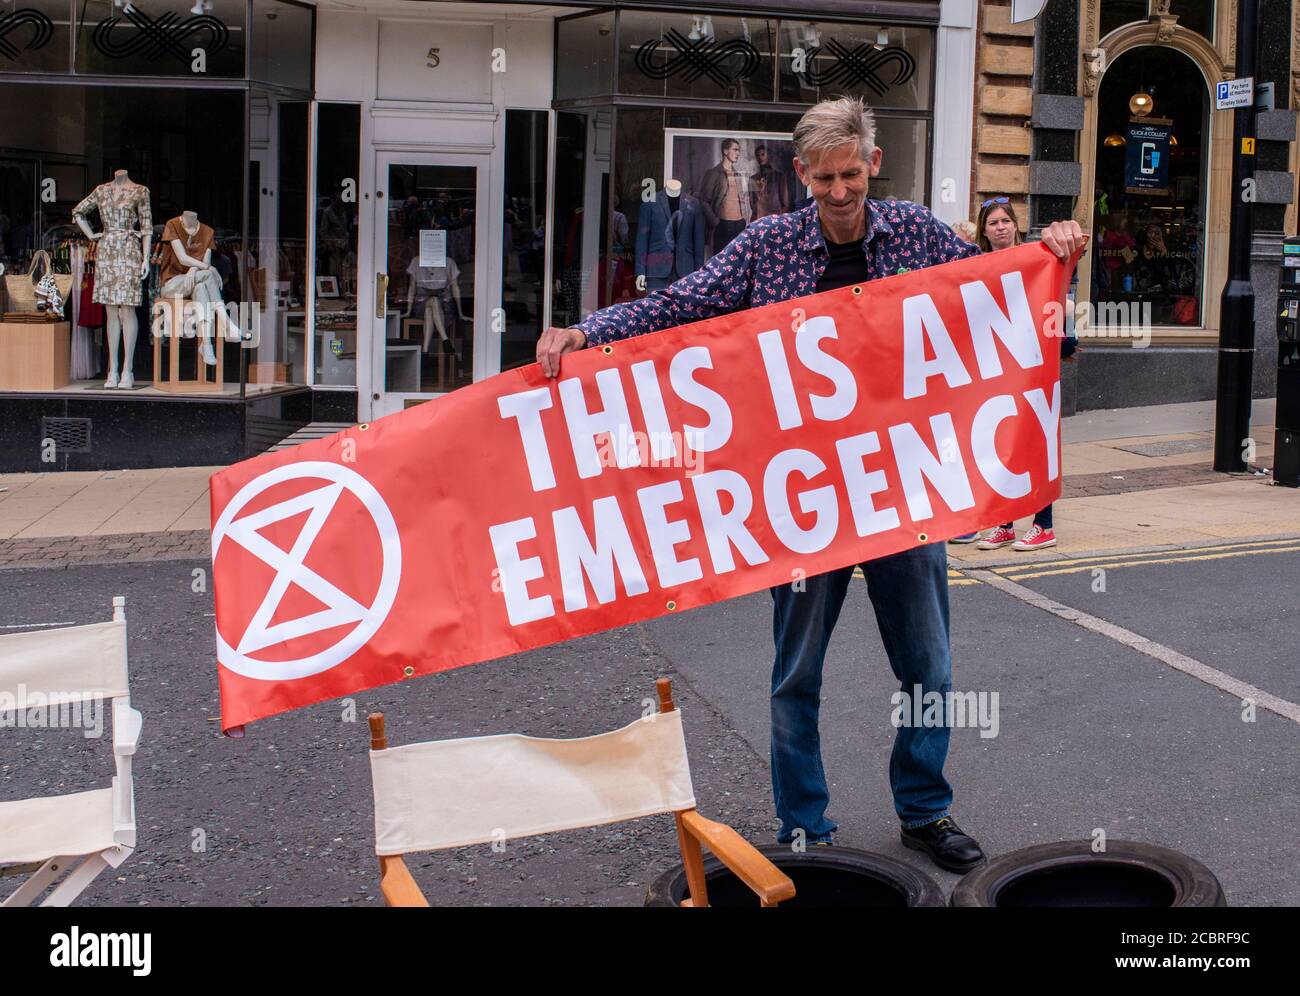 Harrogate, North Yorkshire, UK. 15th Aug, 2020. Members of Extinction Rebellion reclaim public areas in the centre of the town by occupying parking spaces. Credit: ernesto rogata/Alamy Live News Stock Photo